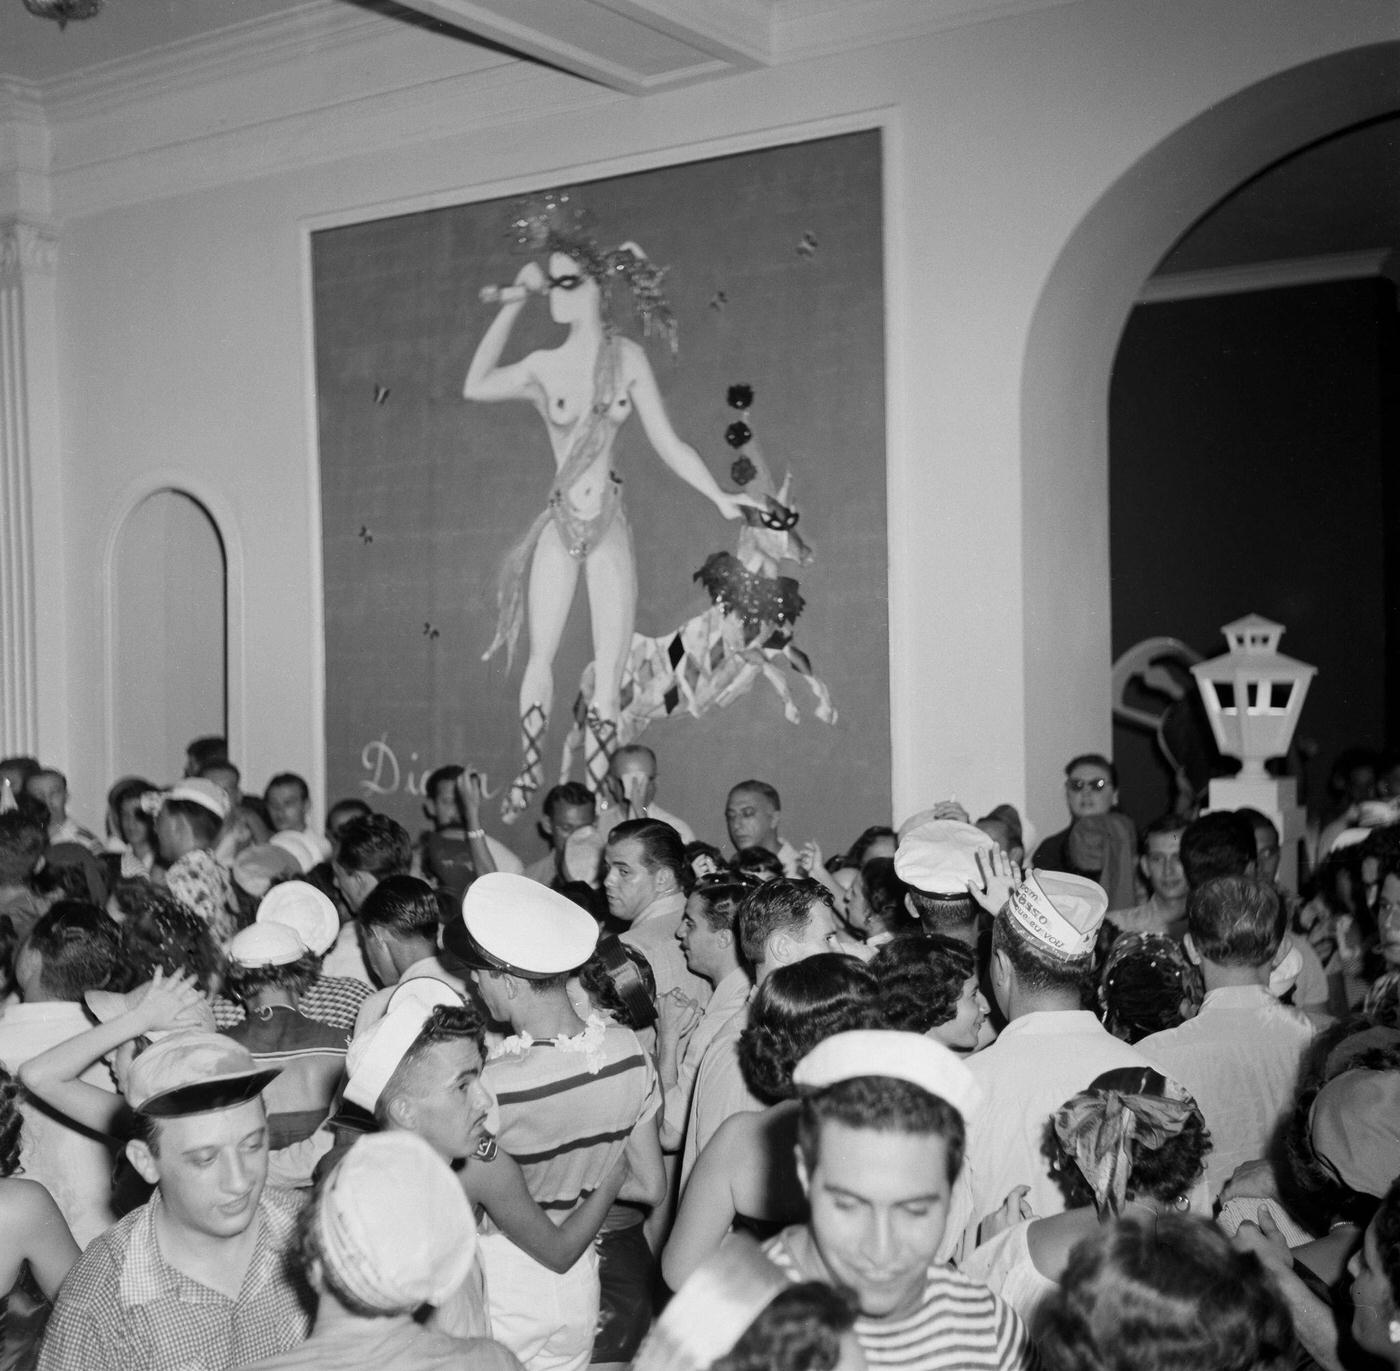 Carnival parade revelers in costumes party in Rio de Janeiro's Carnival. 1953